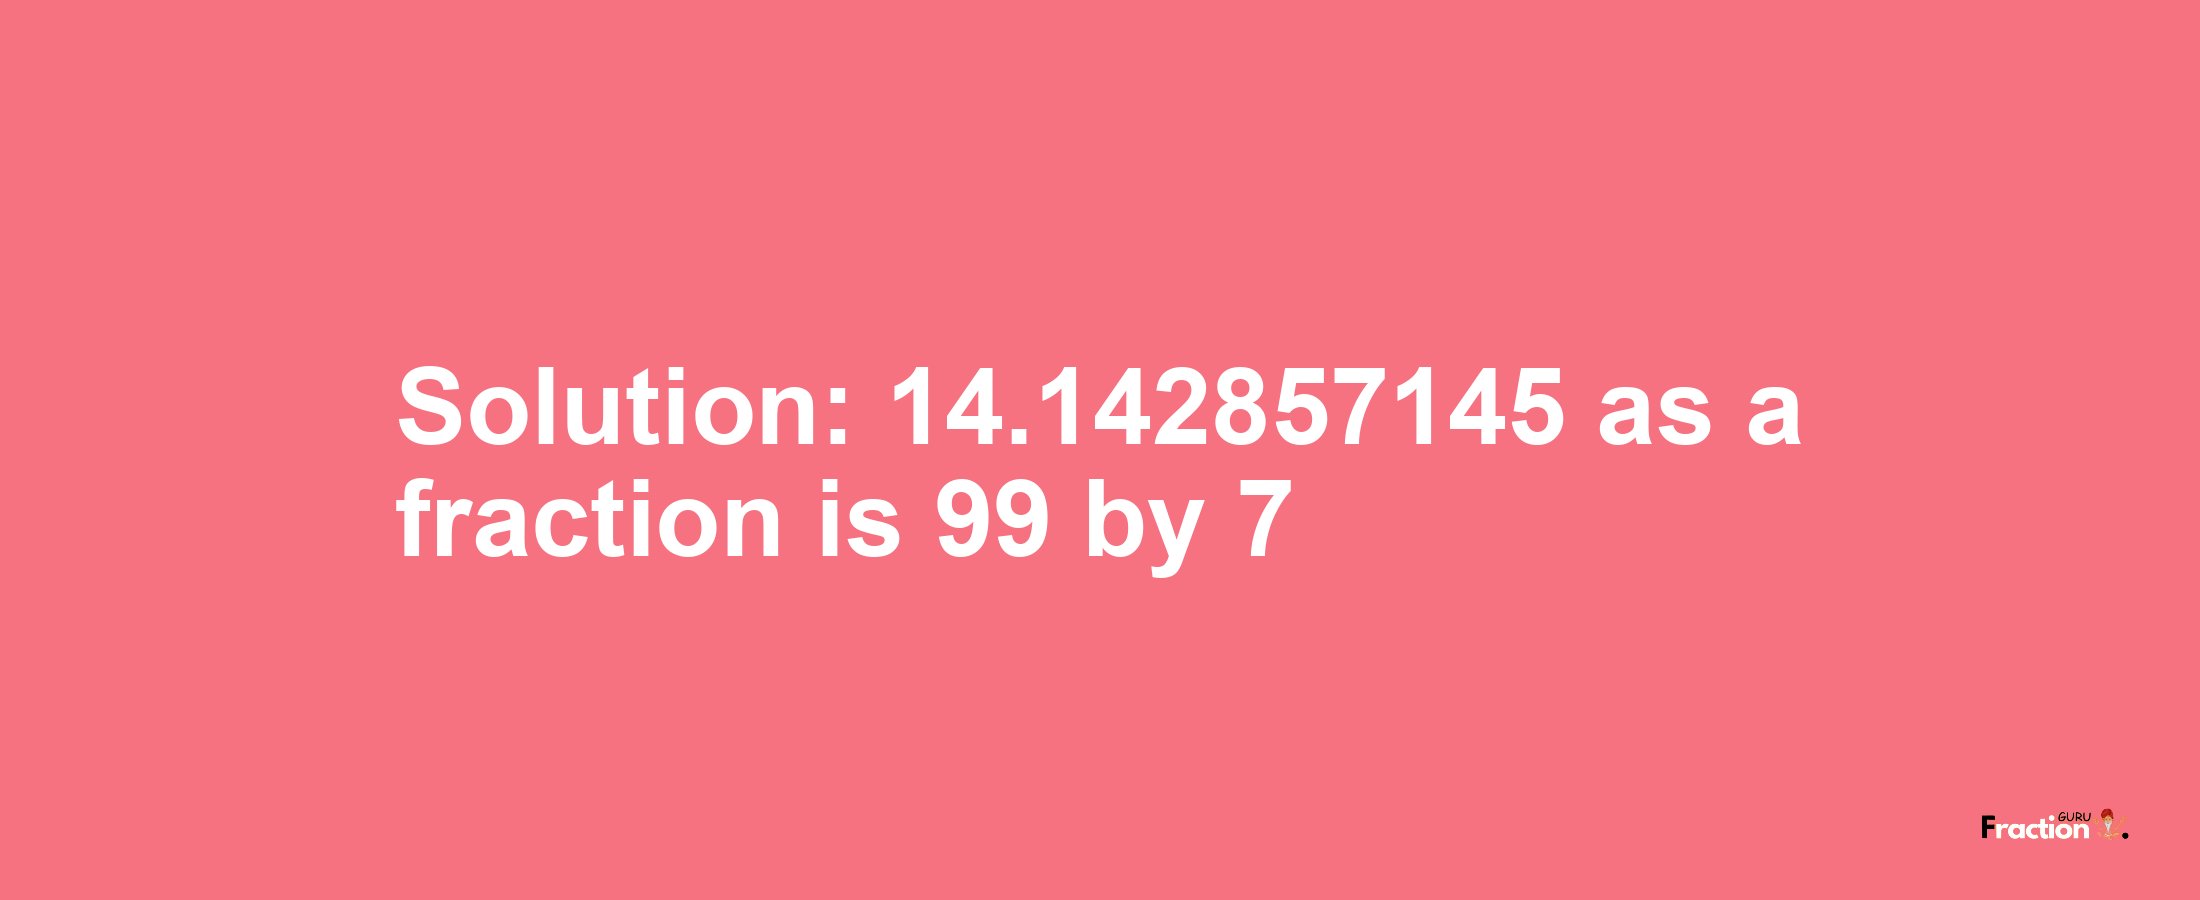 Solution:14.142857145 as a fraction is 99/7